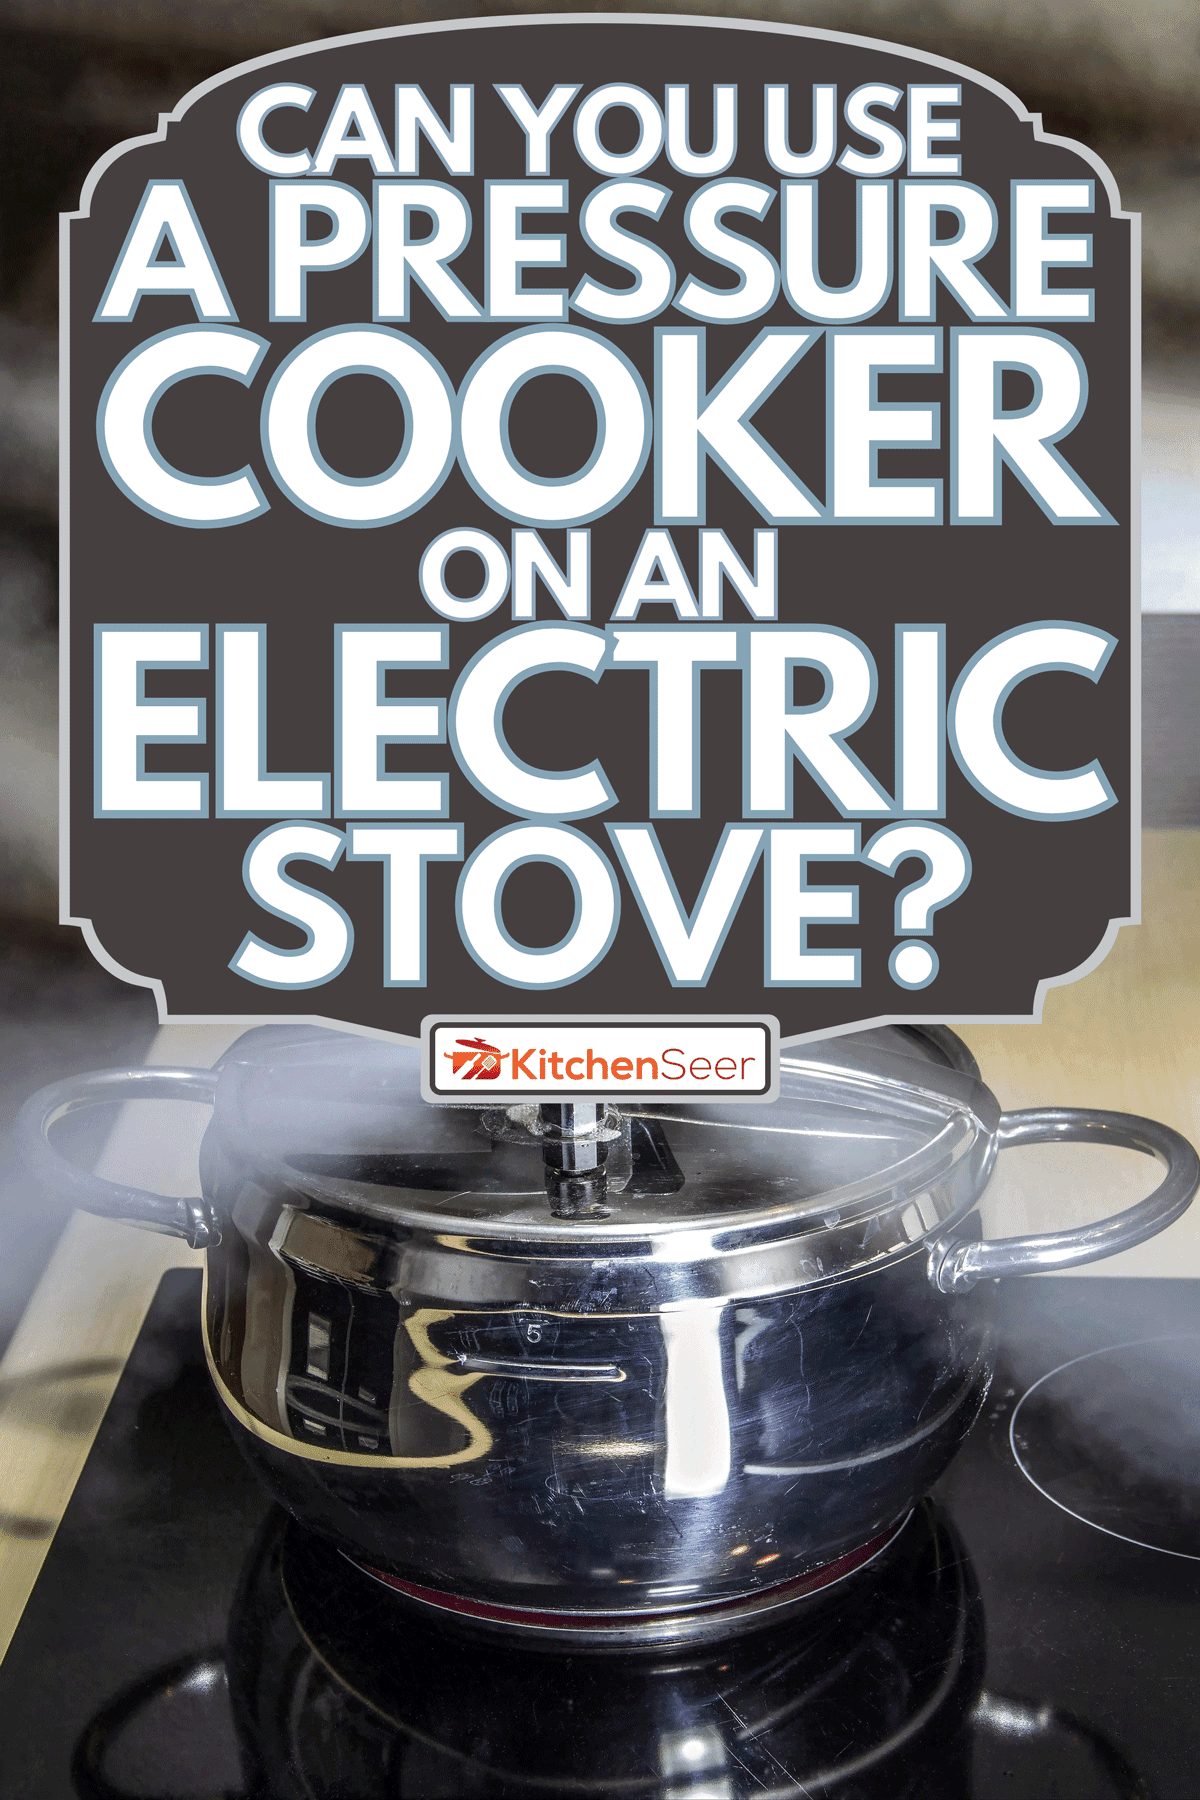 Pressure cooker releasing hot steam, Can You Use A Pressure Cooker On An Electric Stove?